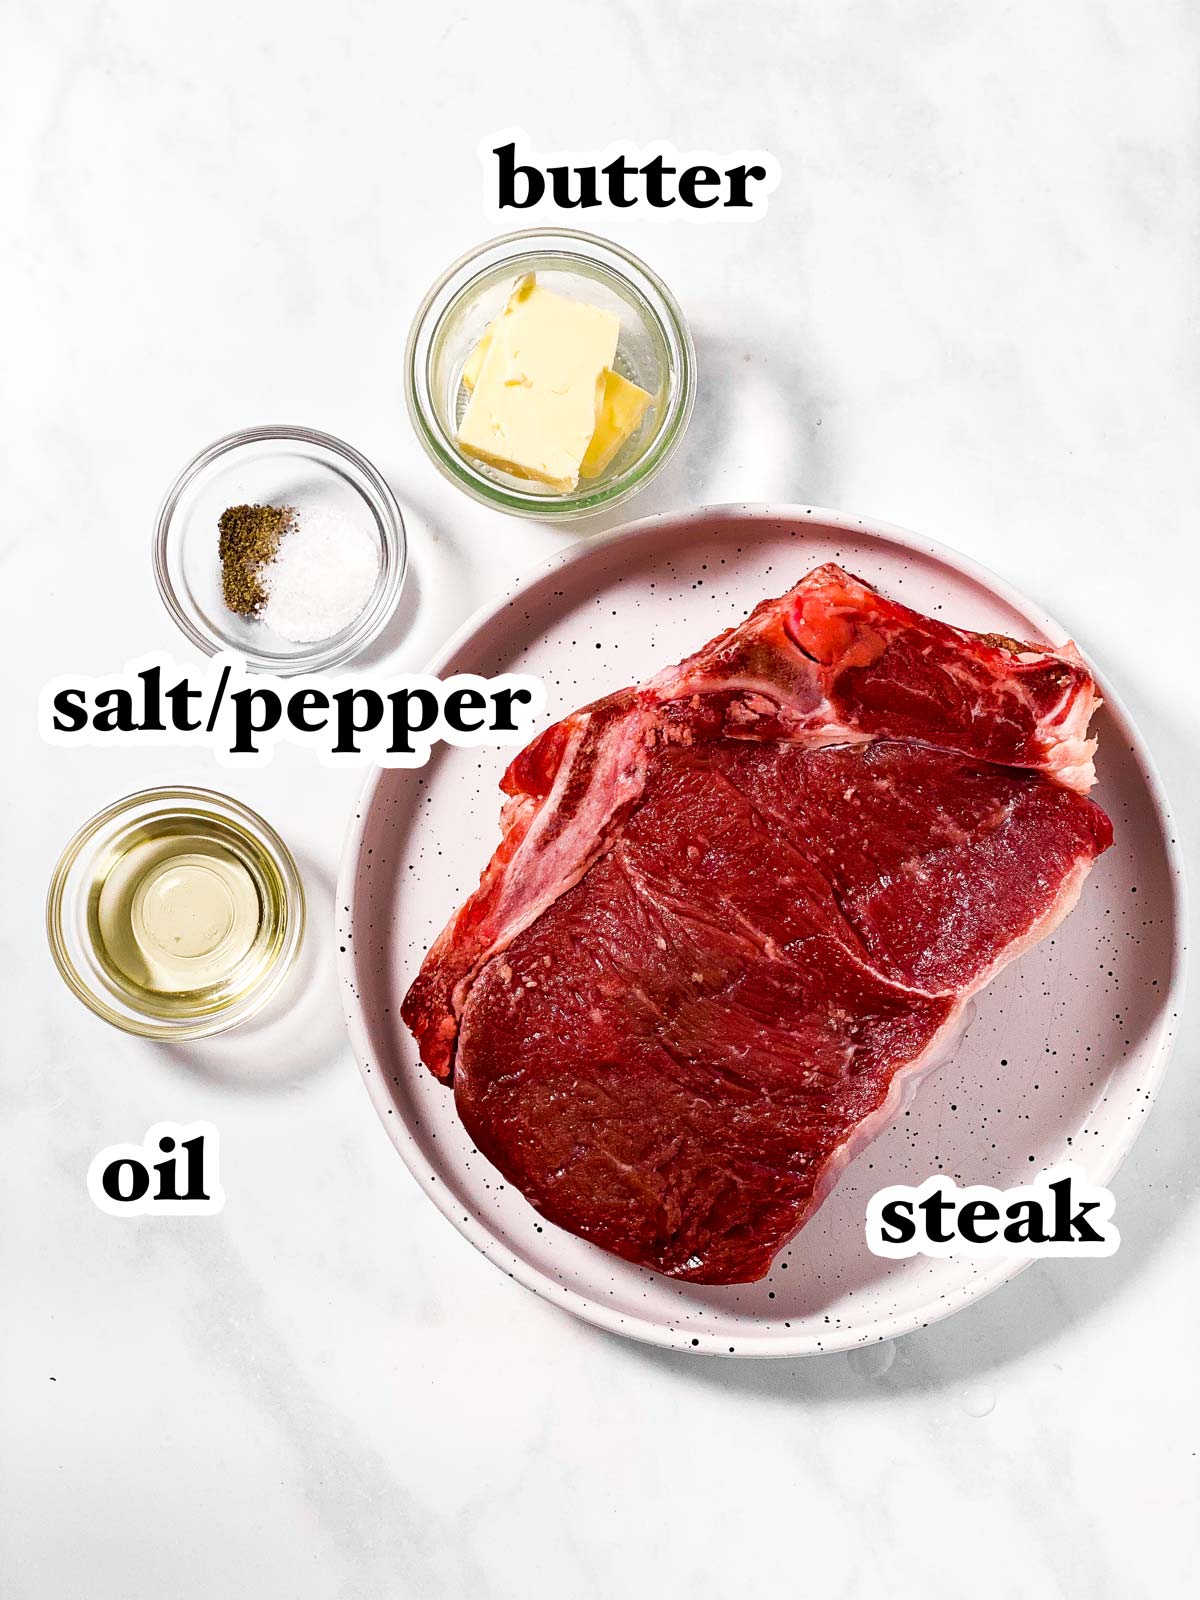 ingredients for oven baked steak with text labels